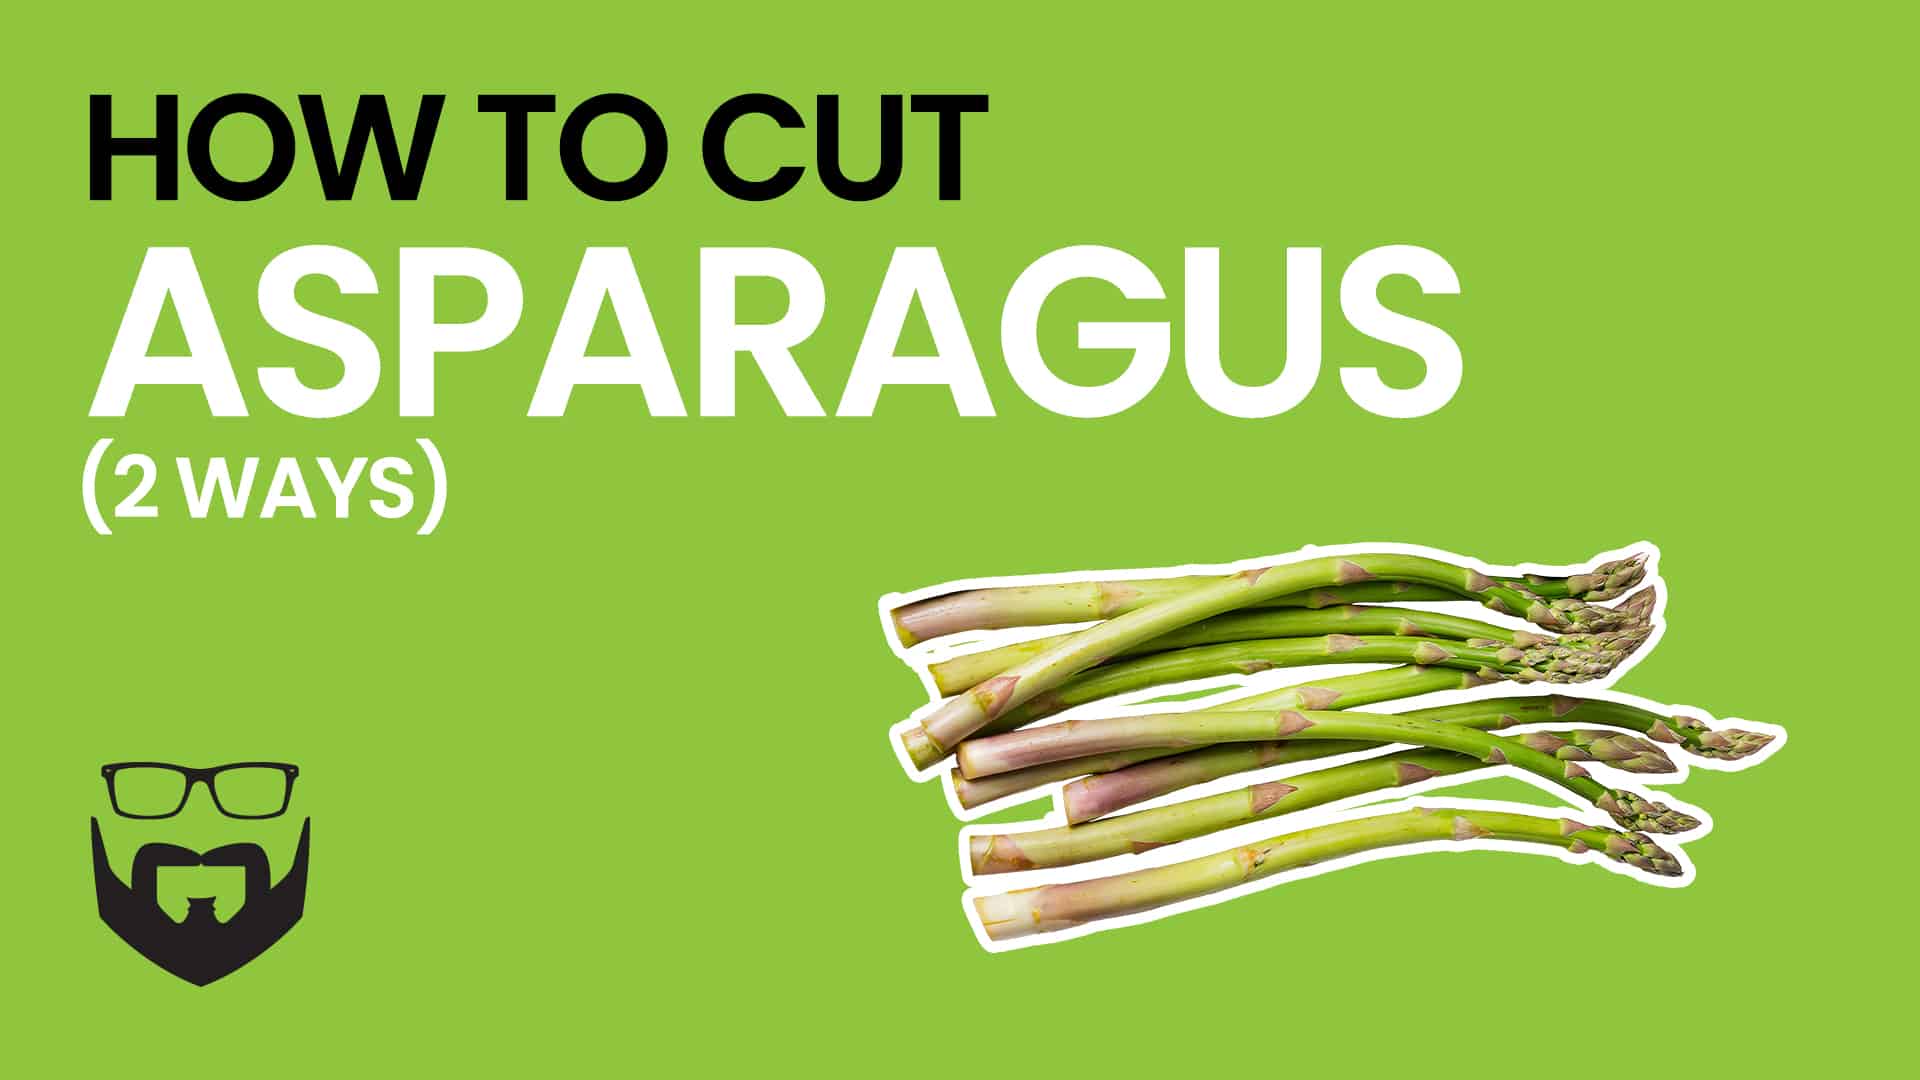 How to Cut Asparagus (2 Ways) Video - Green